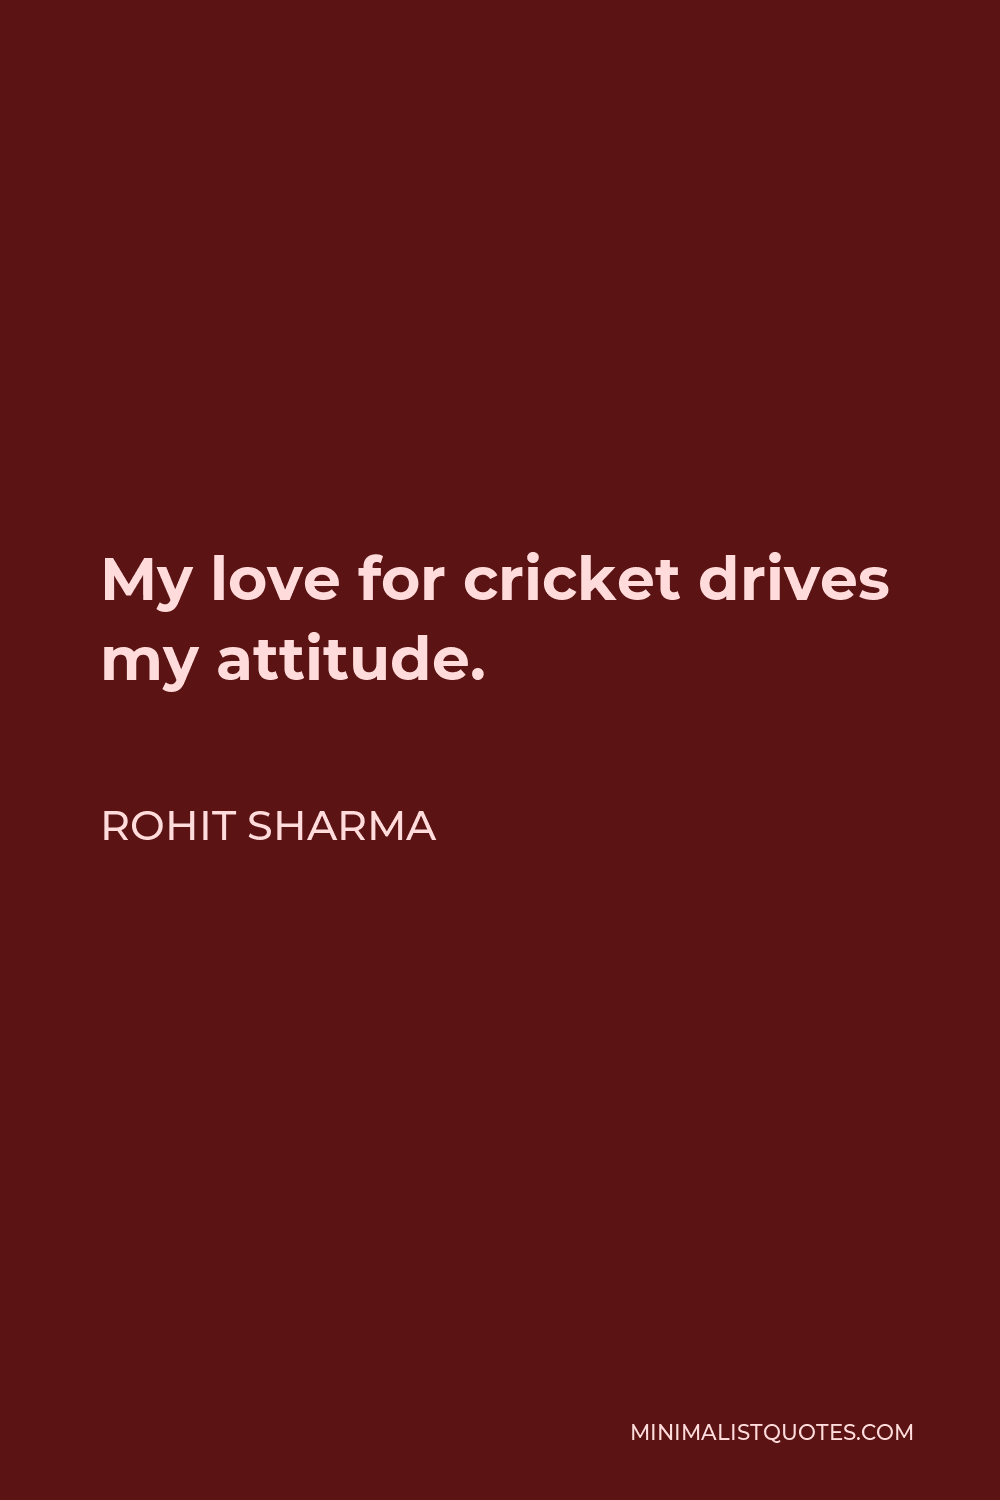 Rohit Sharma Quote: My love for cricket drives my attitude.